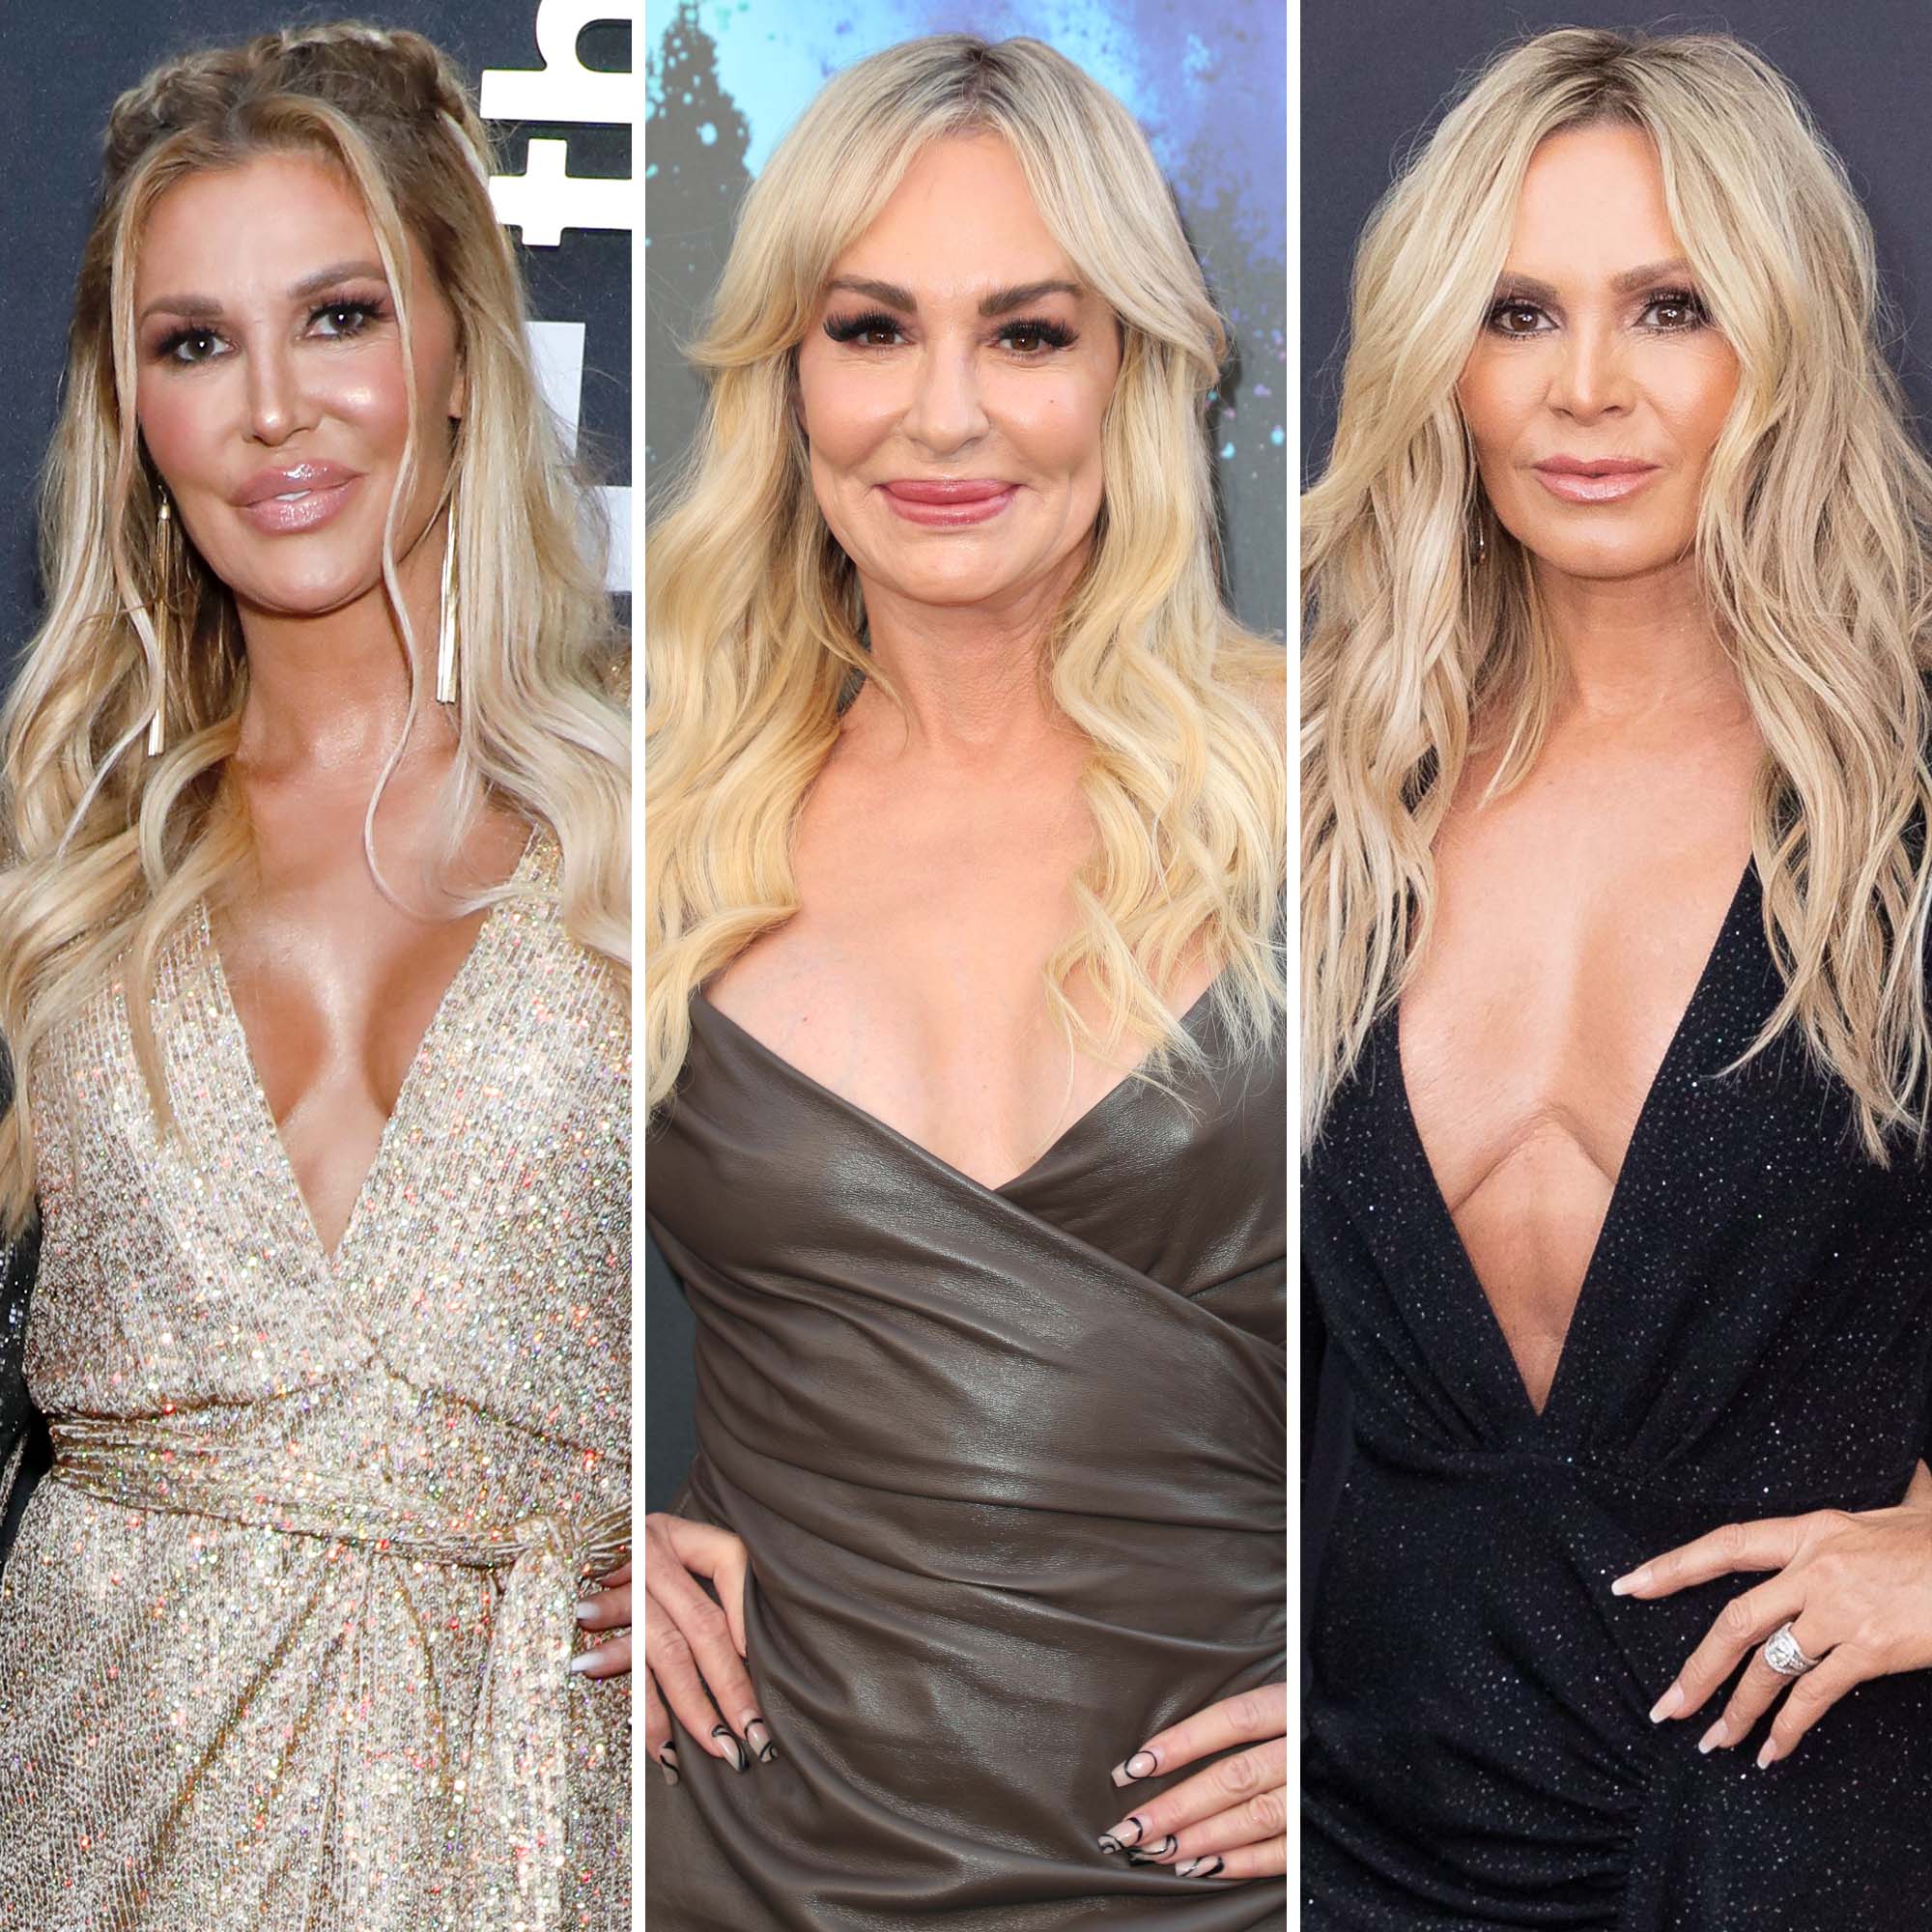 Brandi Glanvilles Feuds With Taylor Armstrong, Tamra Judge Explained photo